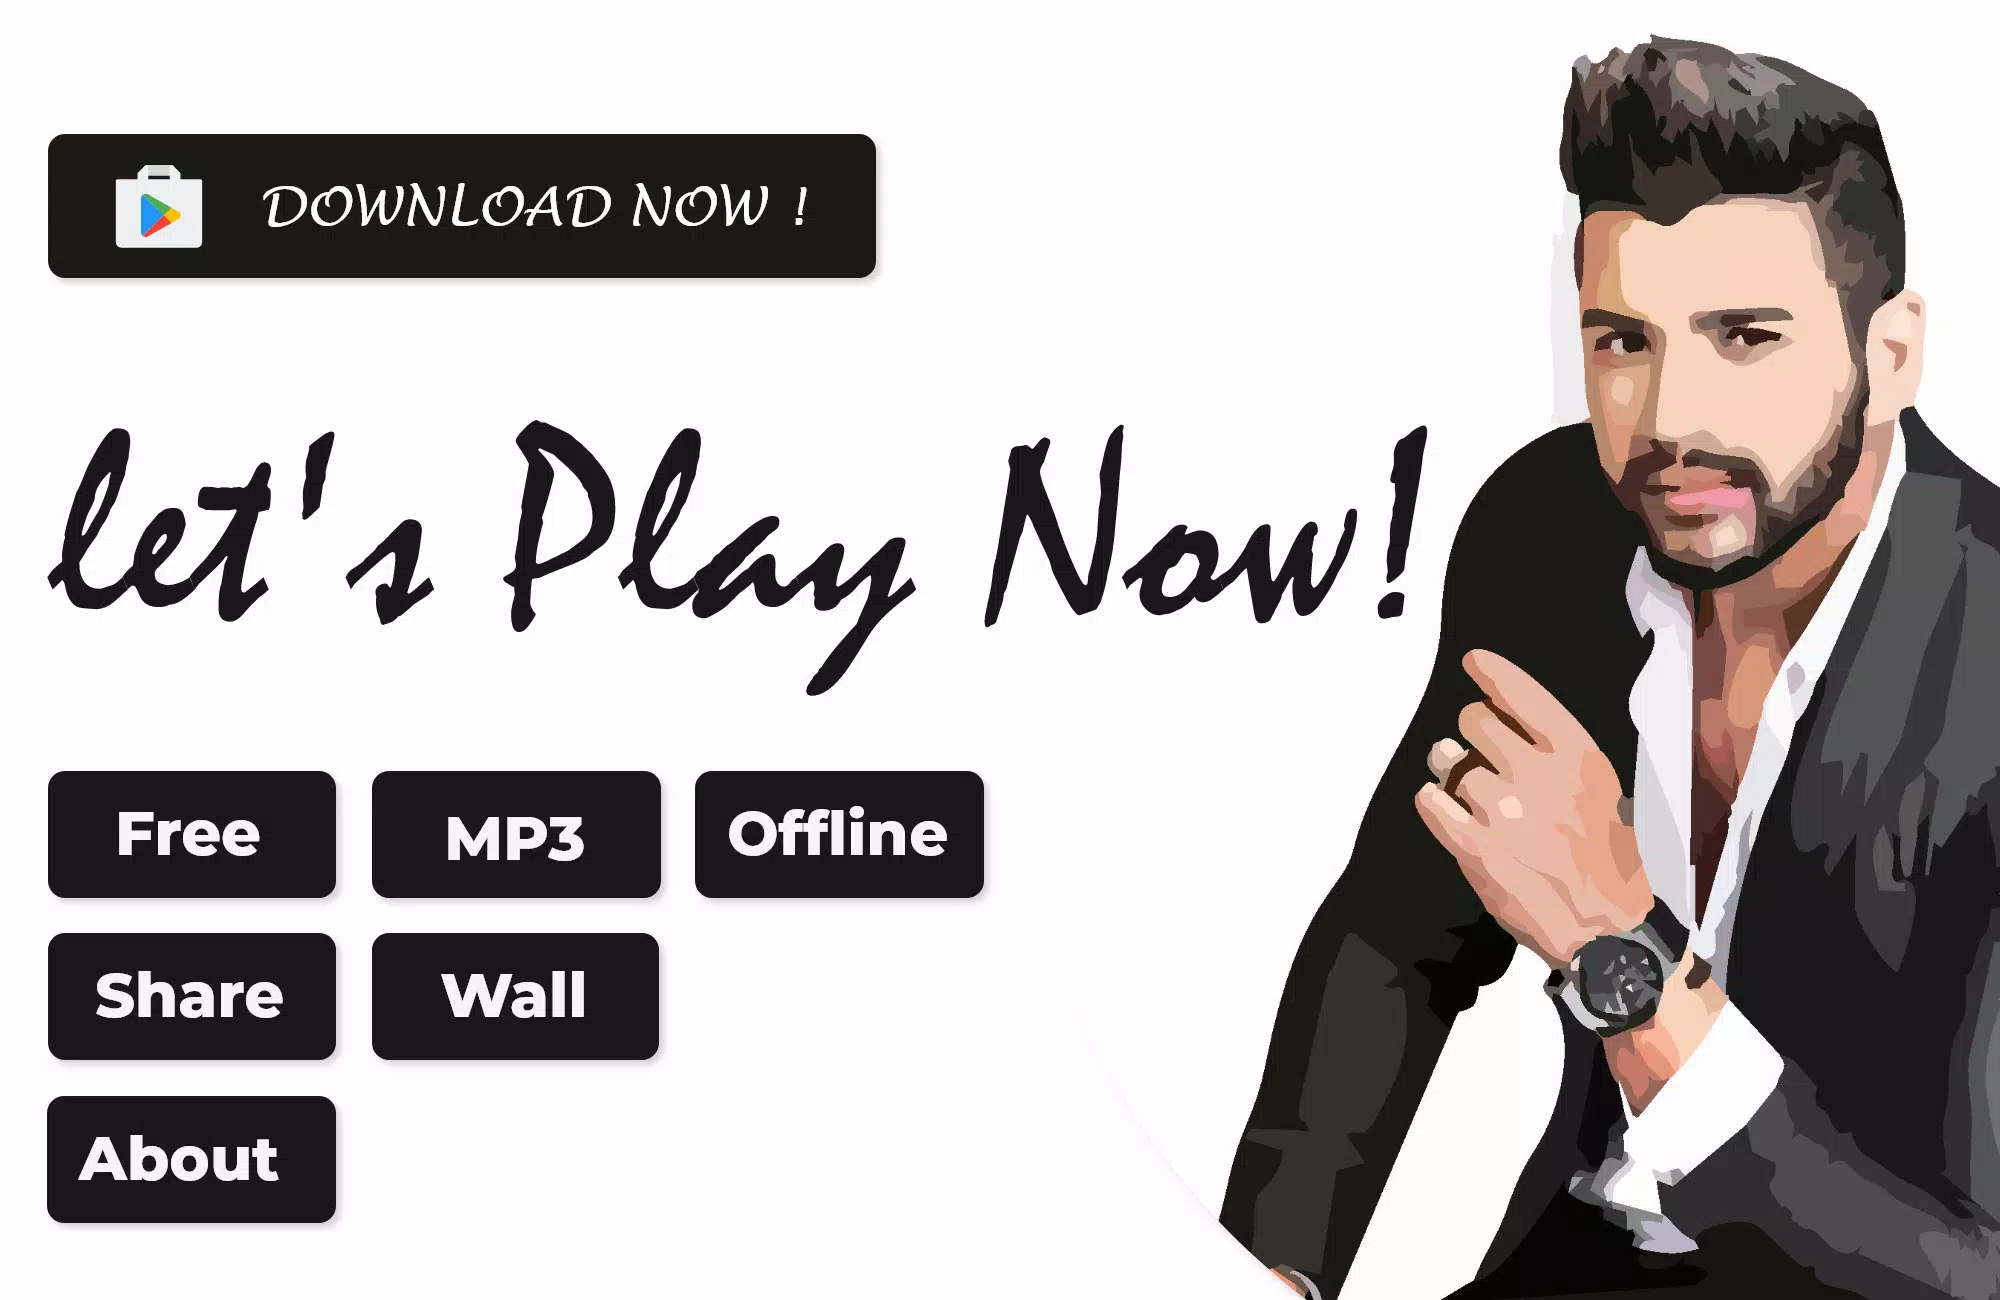 Música Gusttavo Lima mp3 2021 APK for Android Download